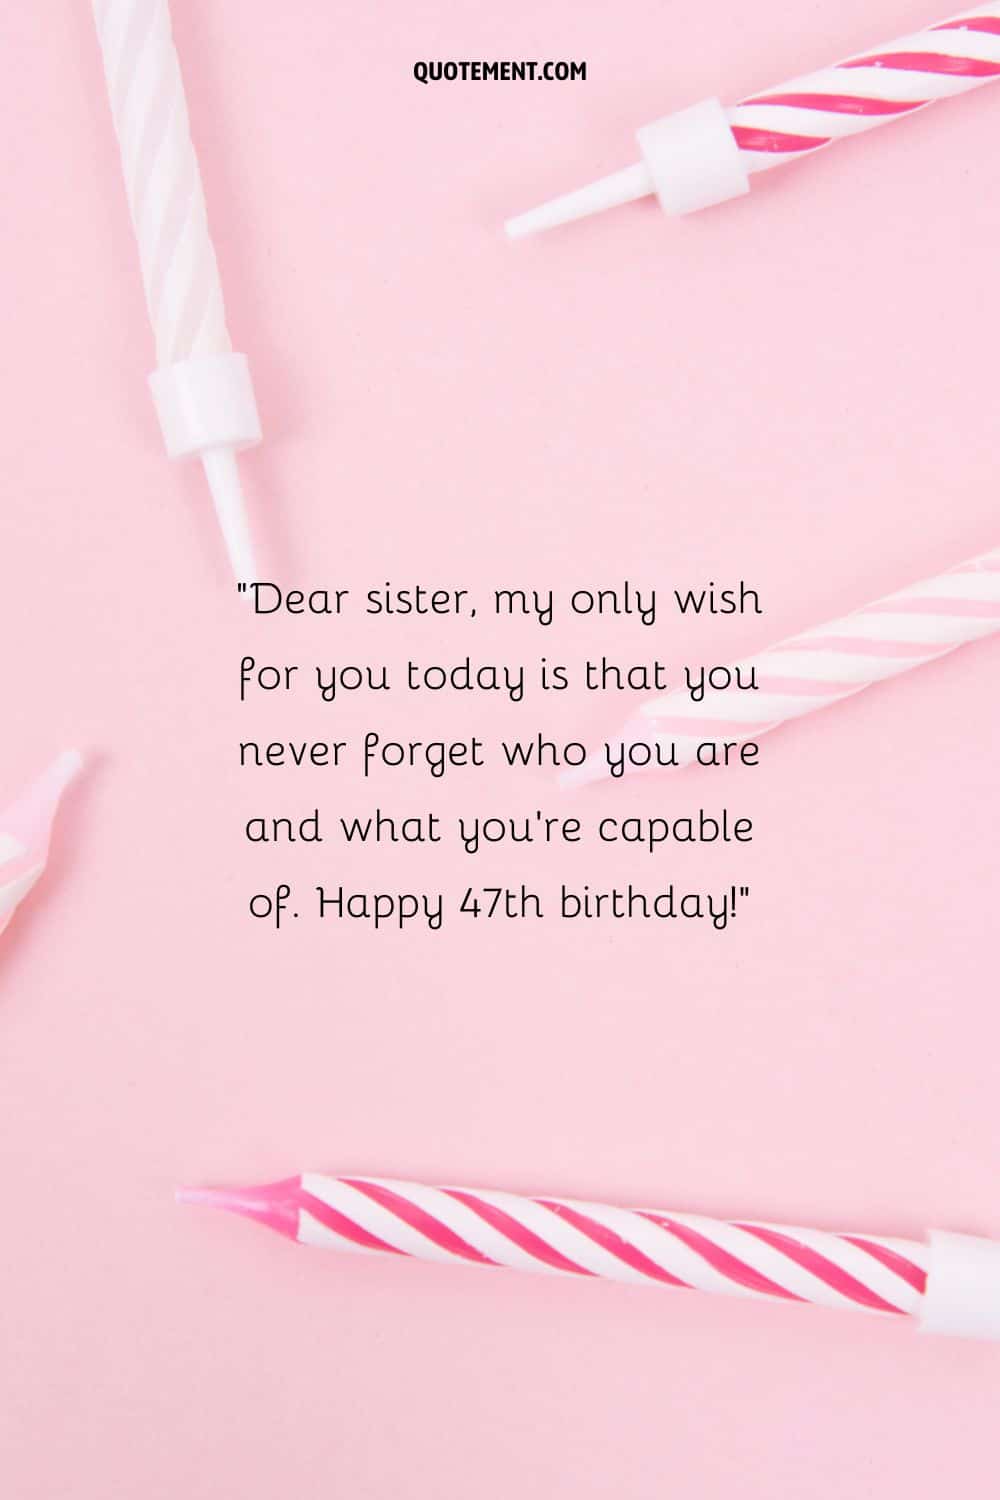 Inspiring message for a sister who turns 47 and birthday candles in the background
